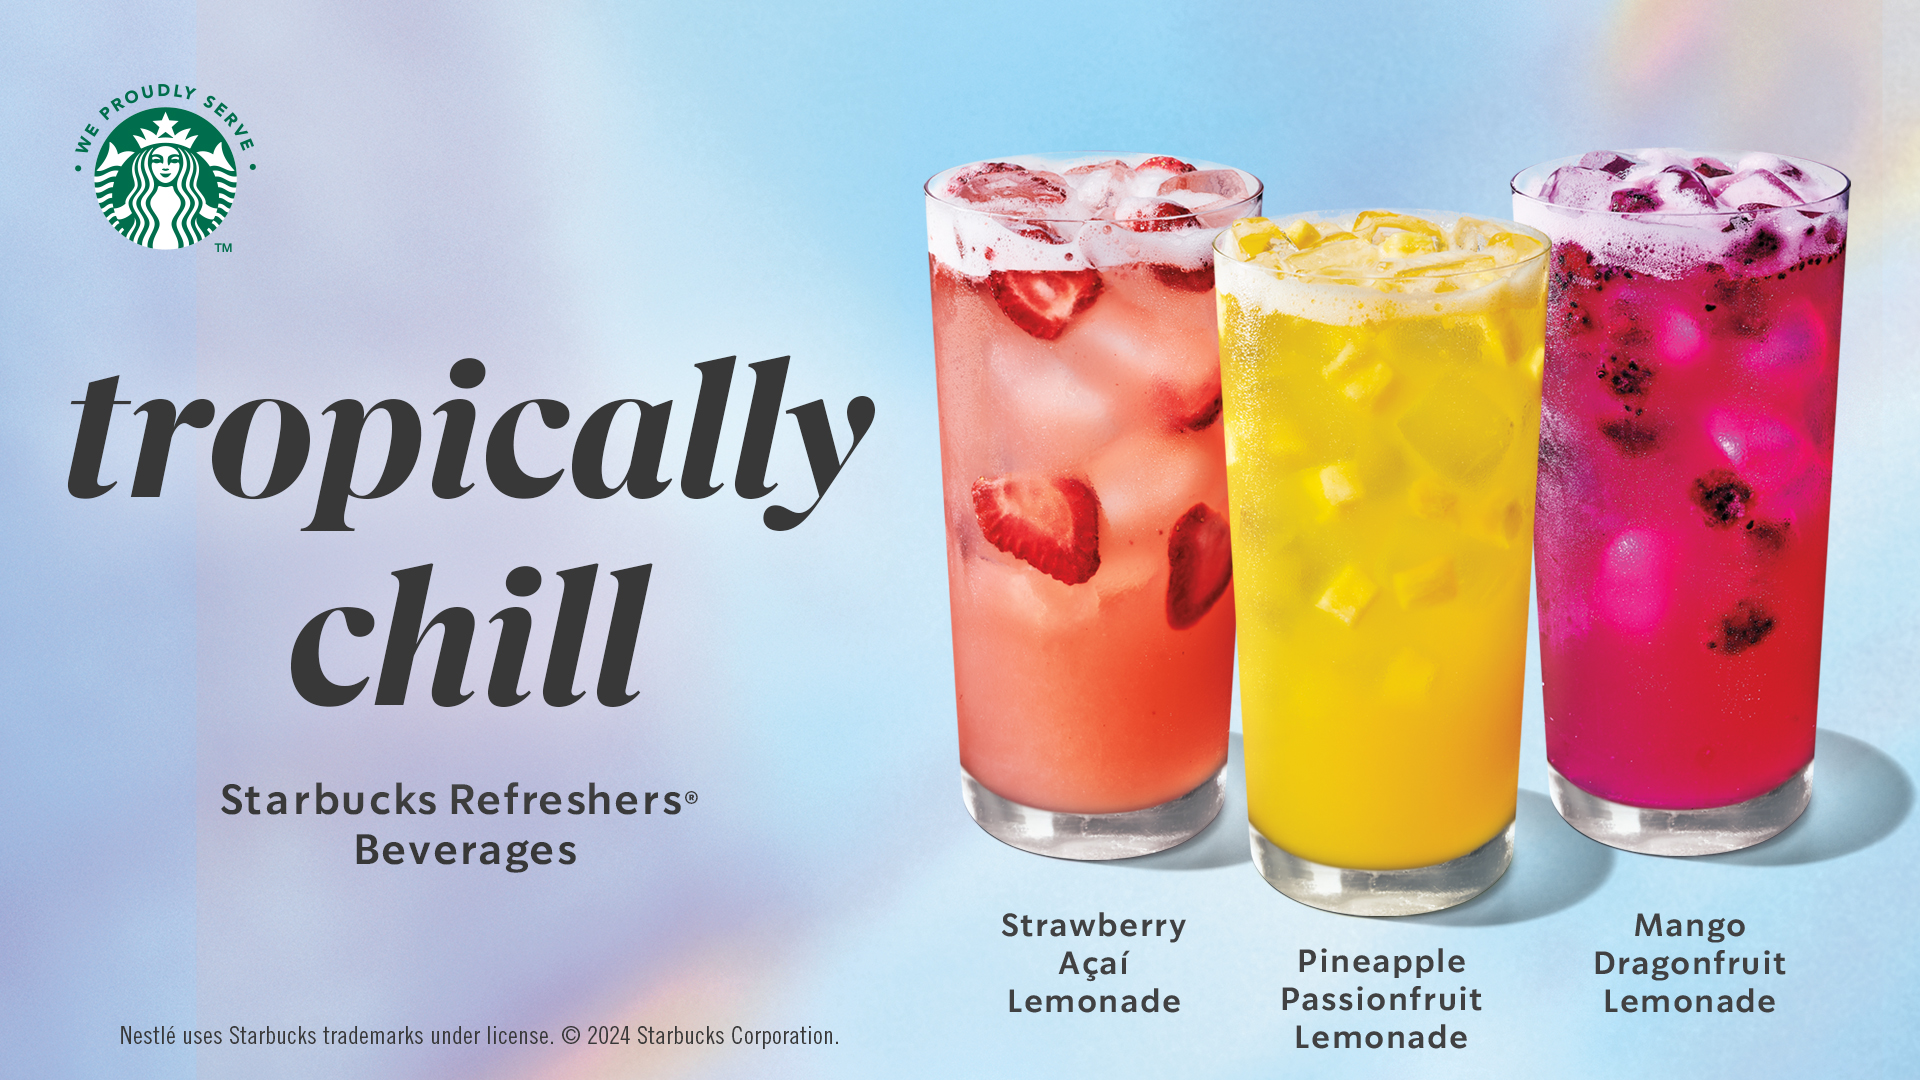 Discover new flavors for the summer